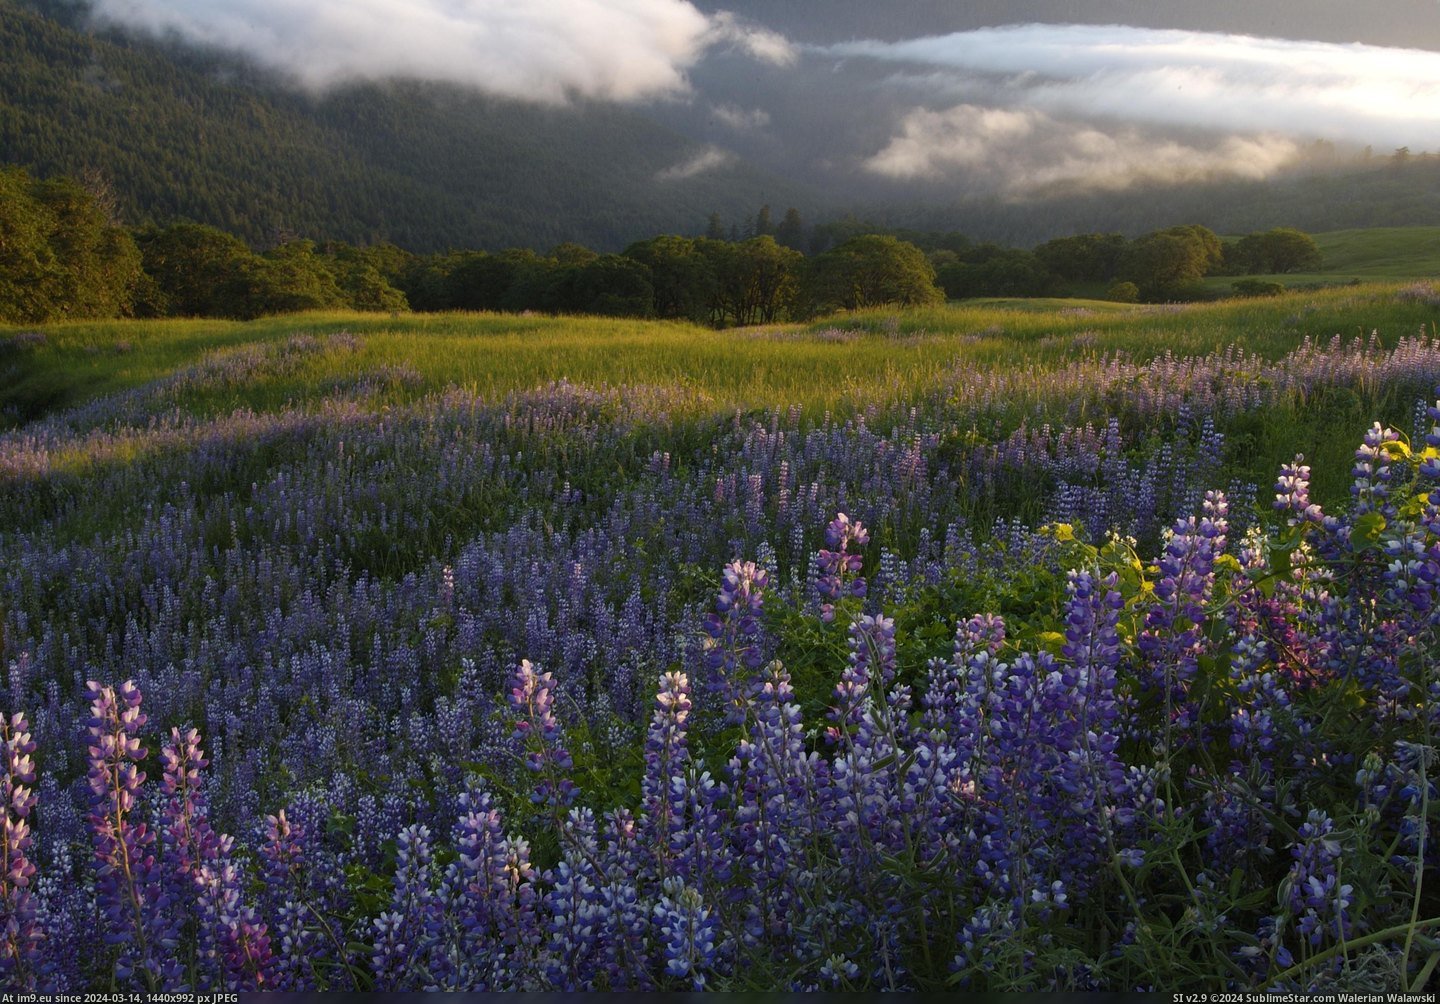 #National #California #State #Redwood #Parks #Lupine #Hills #Fog #Bald [Earthporn] Bald Hills, Lupine, and Fog: Redwood National and State Parks, California. [OC] [2843x1971] Pic. (Bild von album My r/EARTHPORN favs))